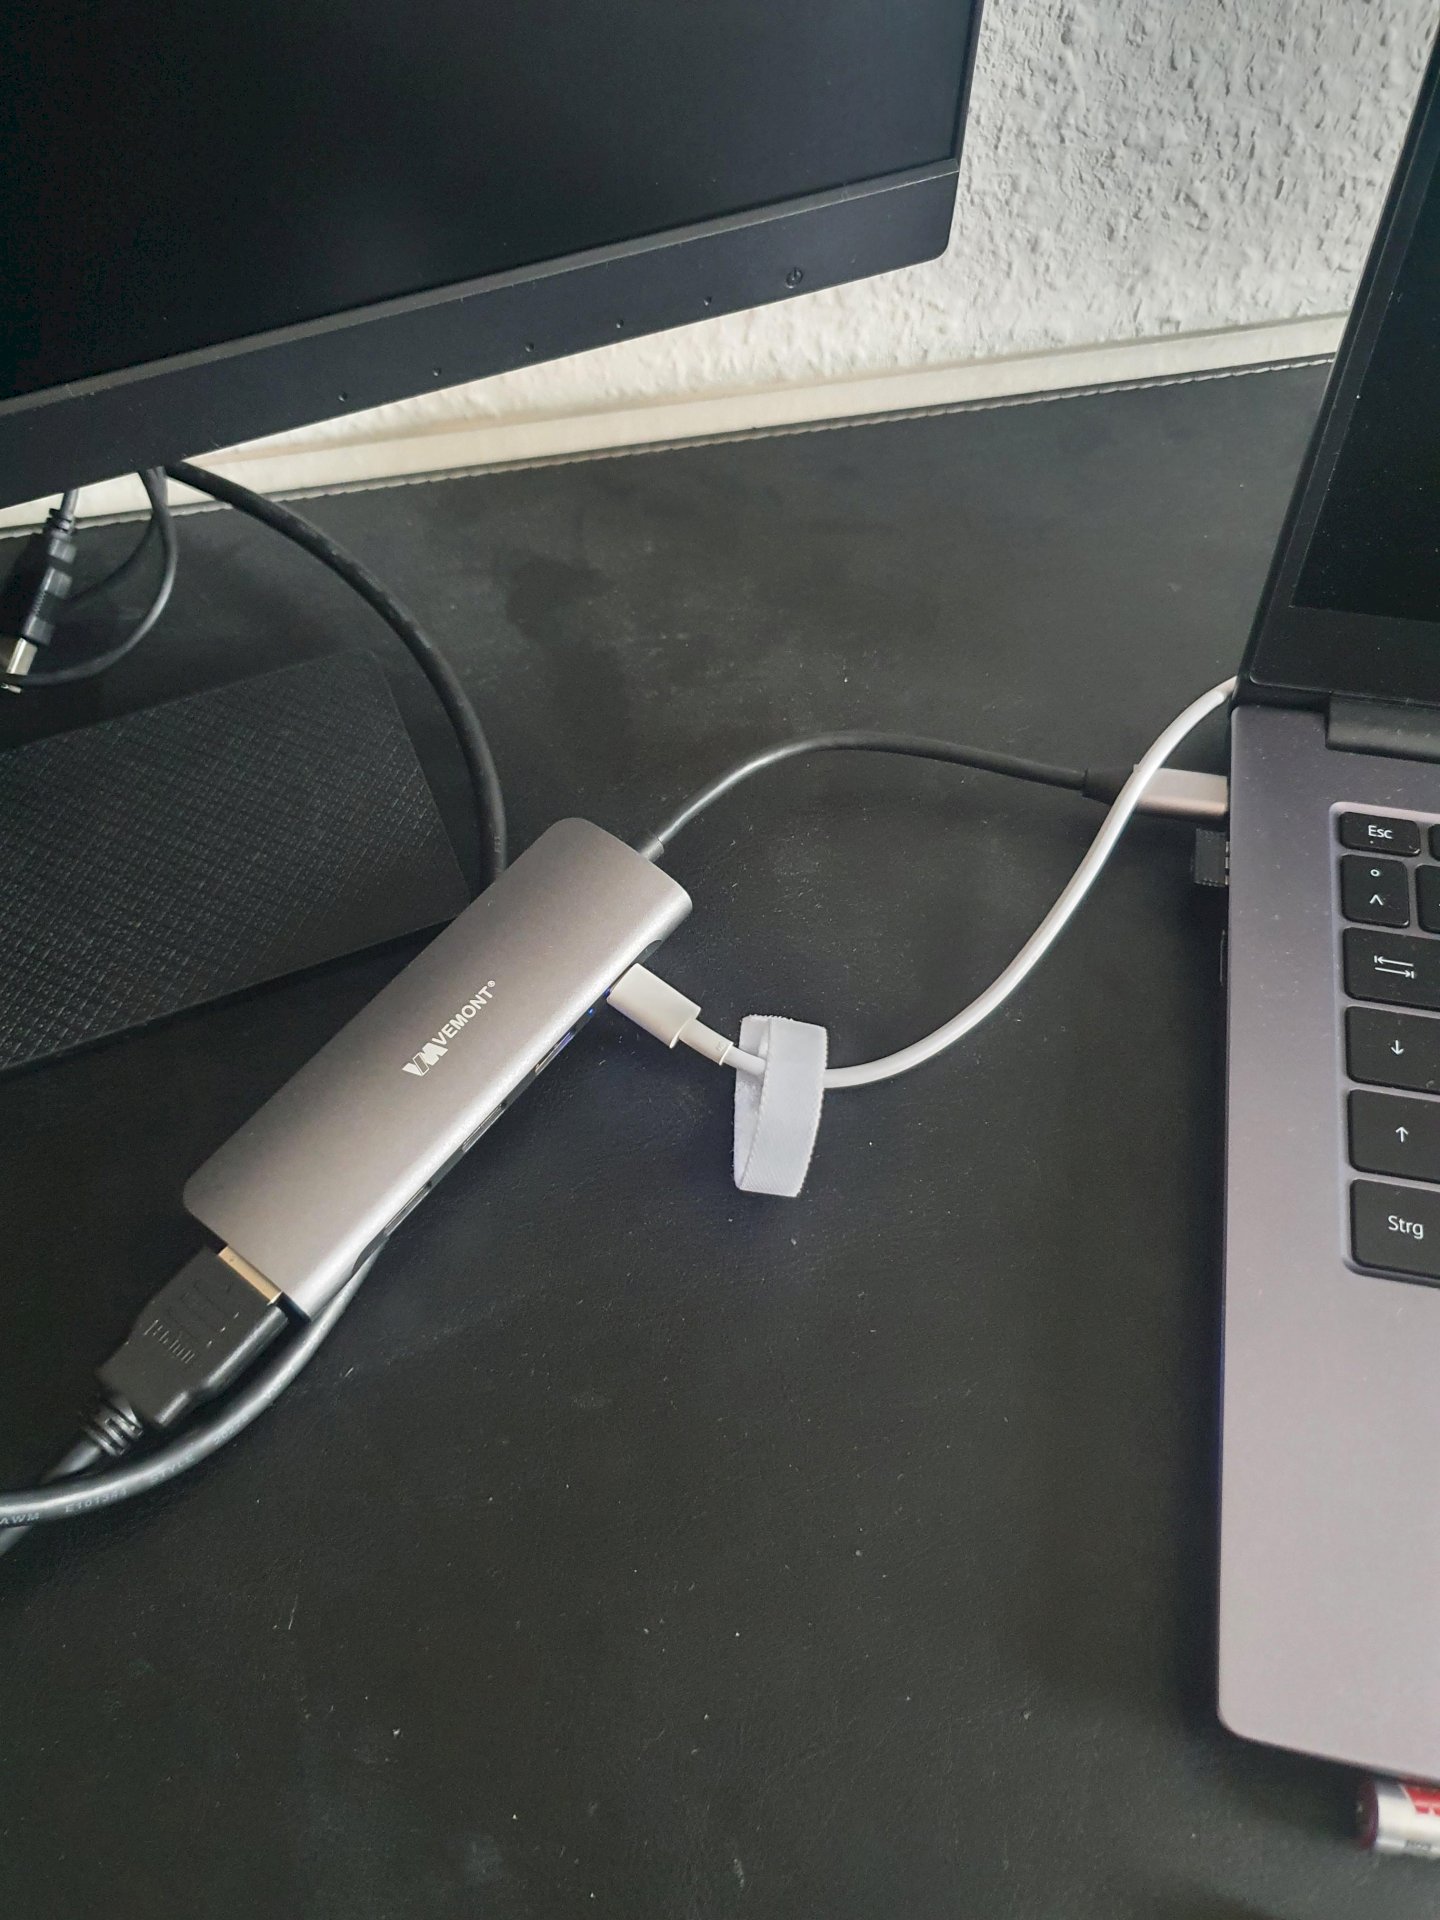 USB C docking station hub does not work with HDMI cable